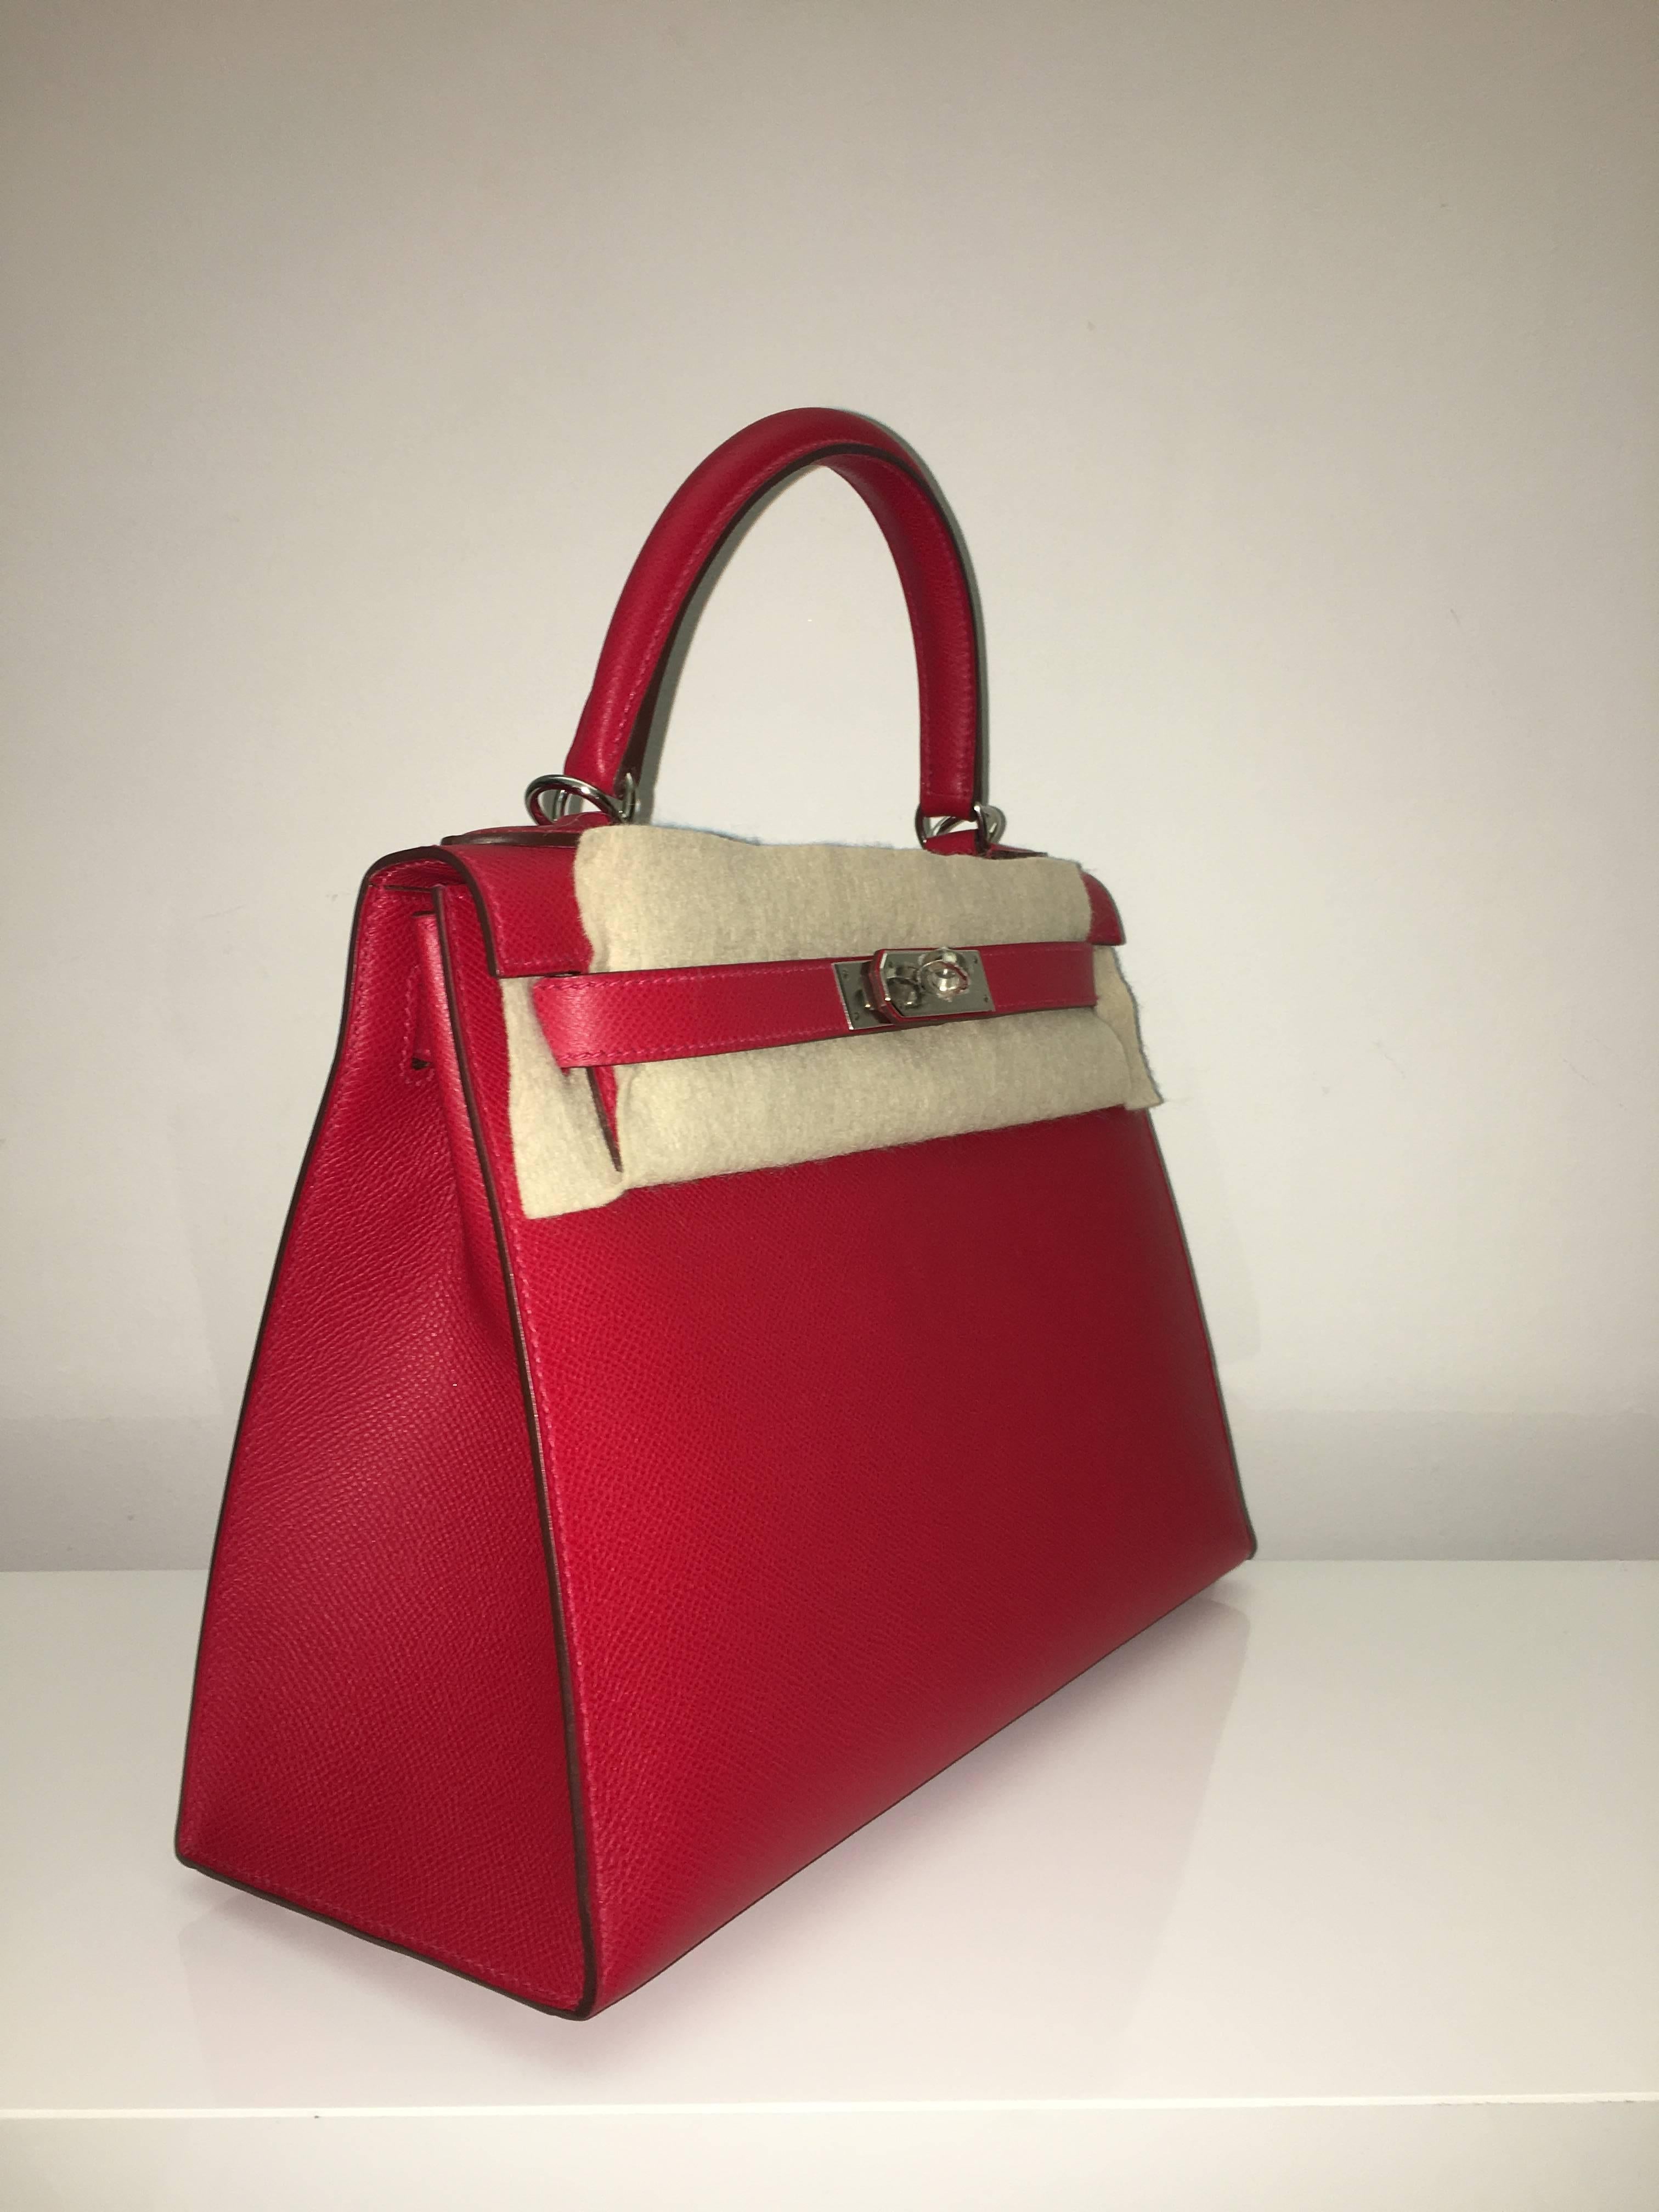 Hermes 
Kelly Size 28
Epsom Leather 
Color Rouge Casak
Palladium (Silver) Hardware 
store fresh, comes with receipt and full set (dust bag, box...) 
Hydeparkfashion specializes in sourcing and delivering authentic luxury handbags, mainly